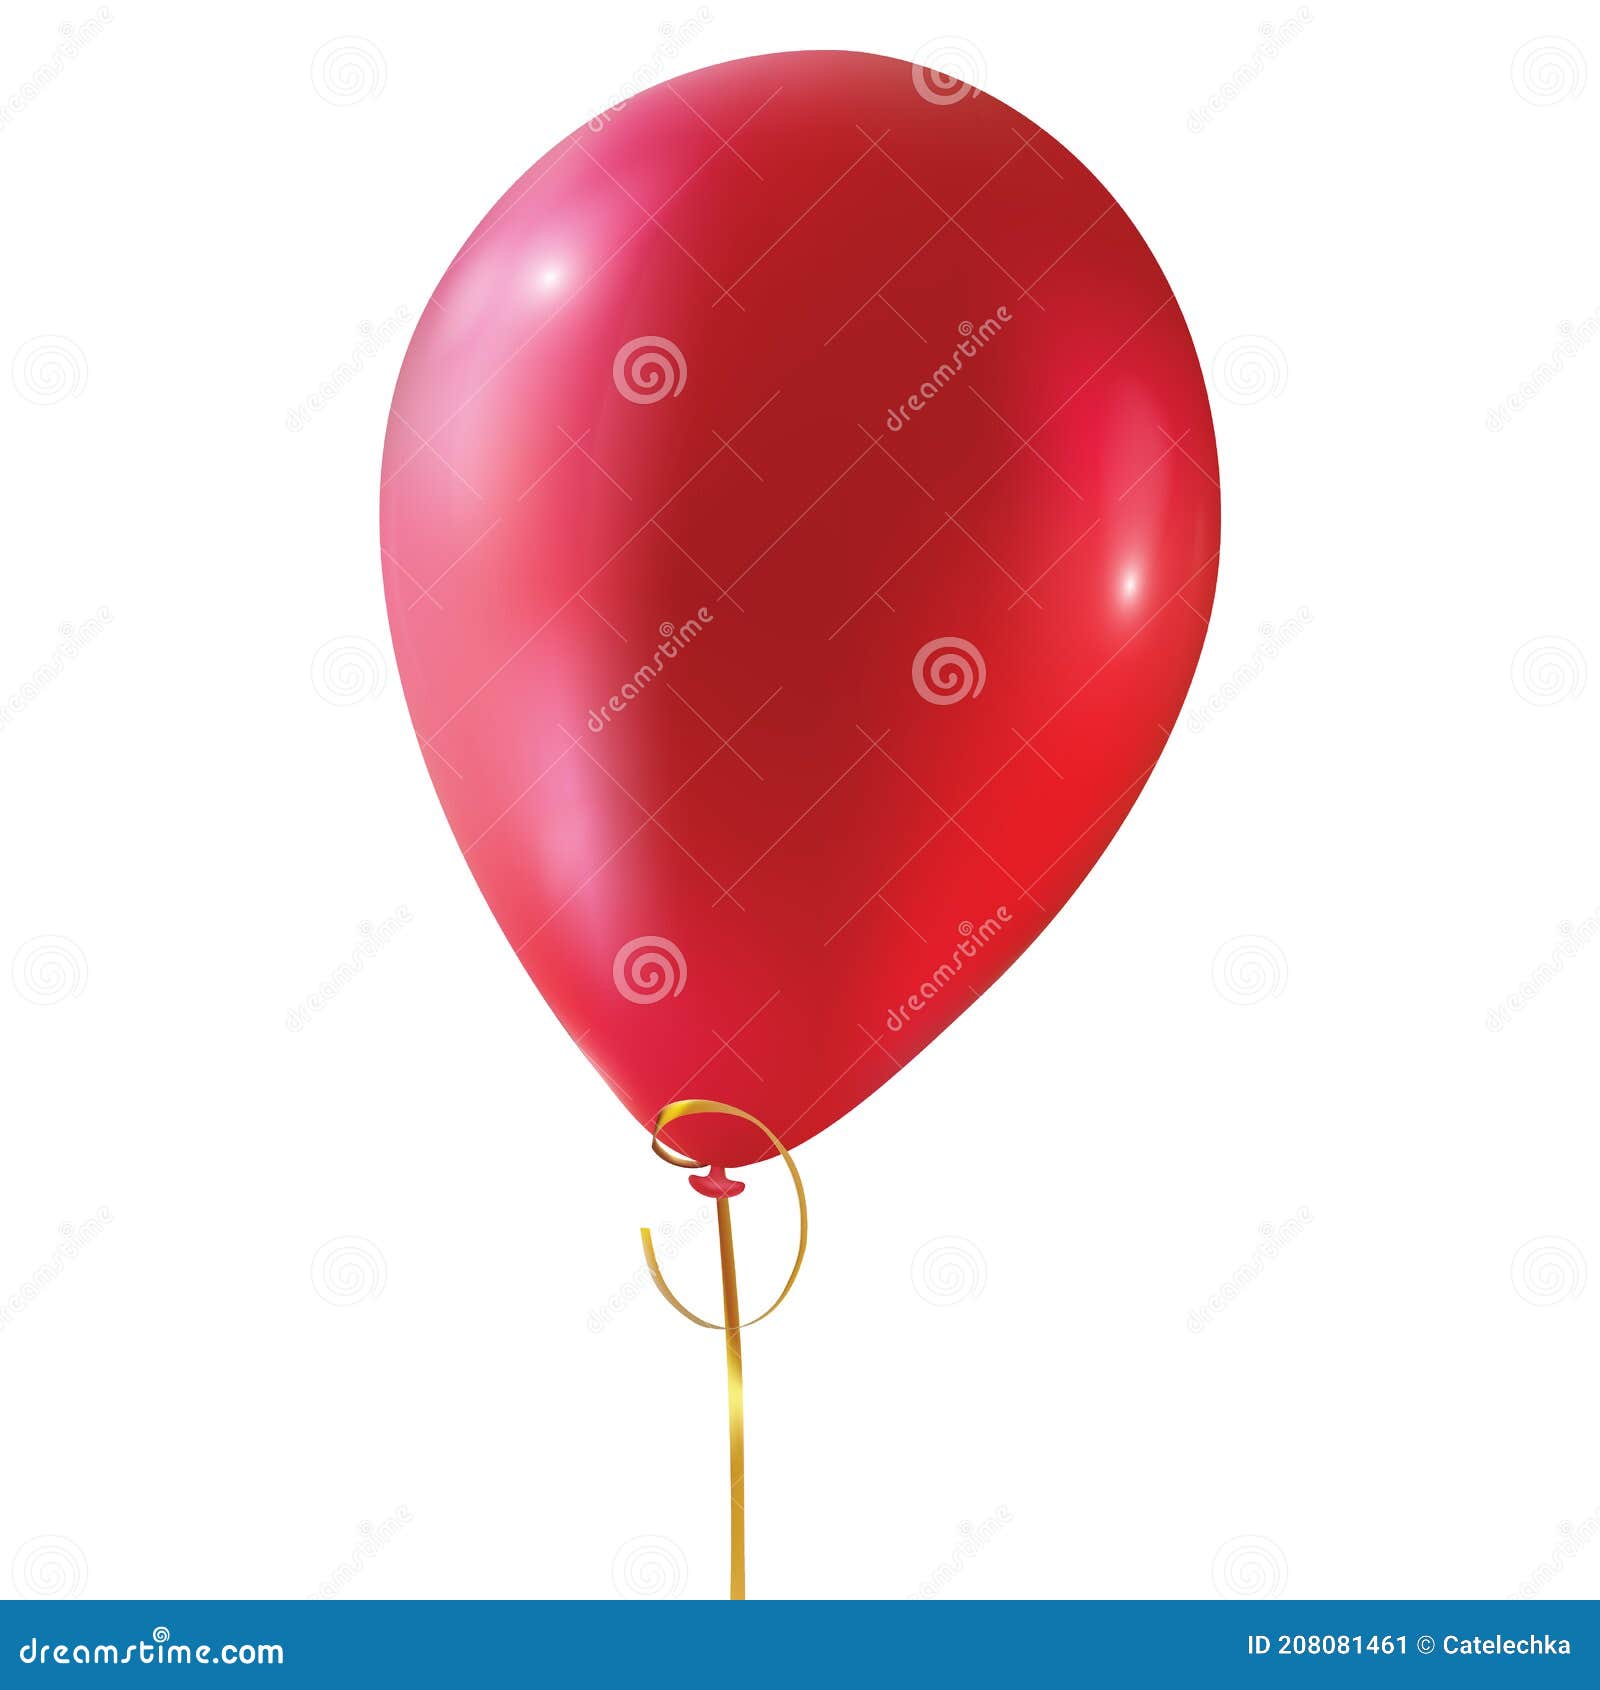 Red Glossy Balloon With Curved Ribbon Rope Isolated On White